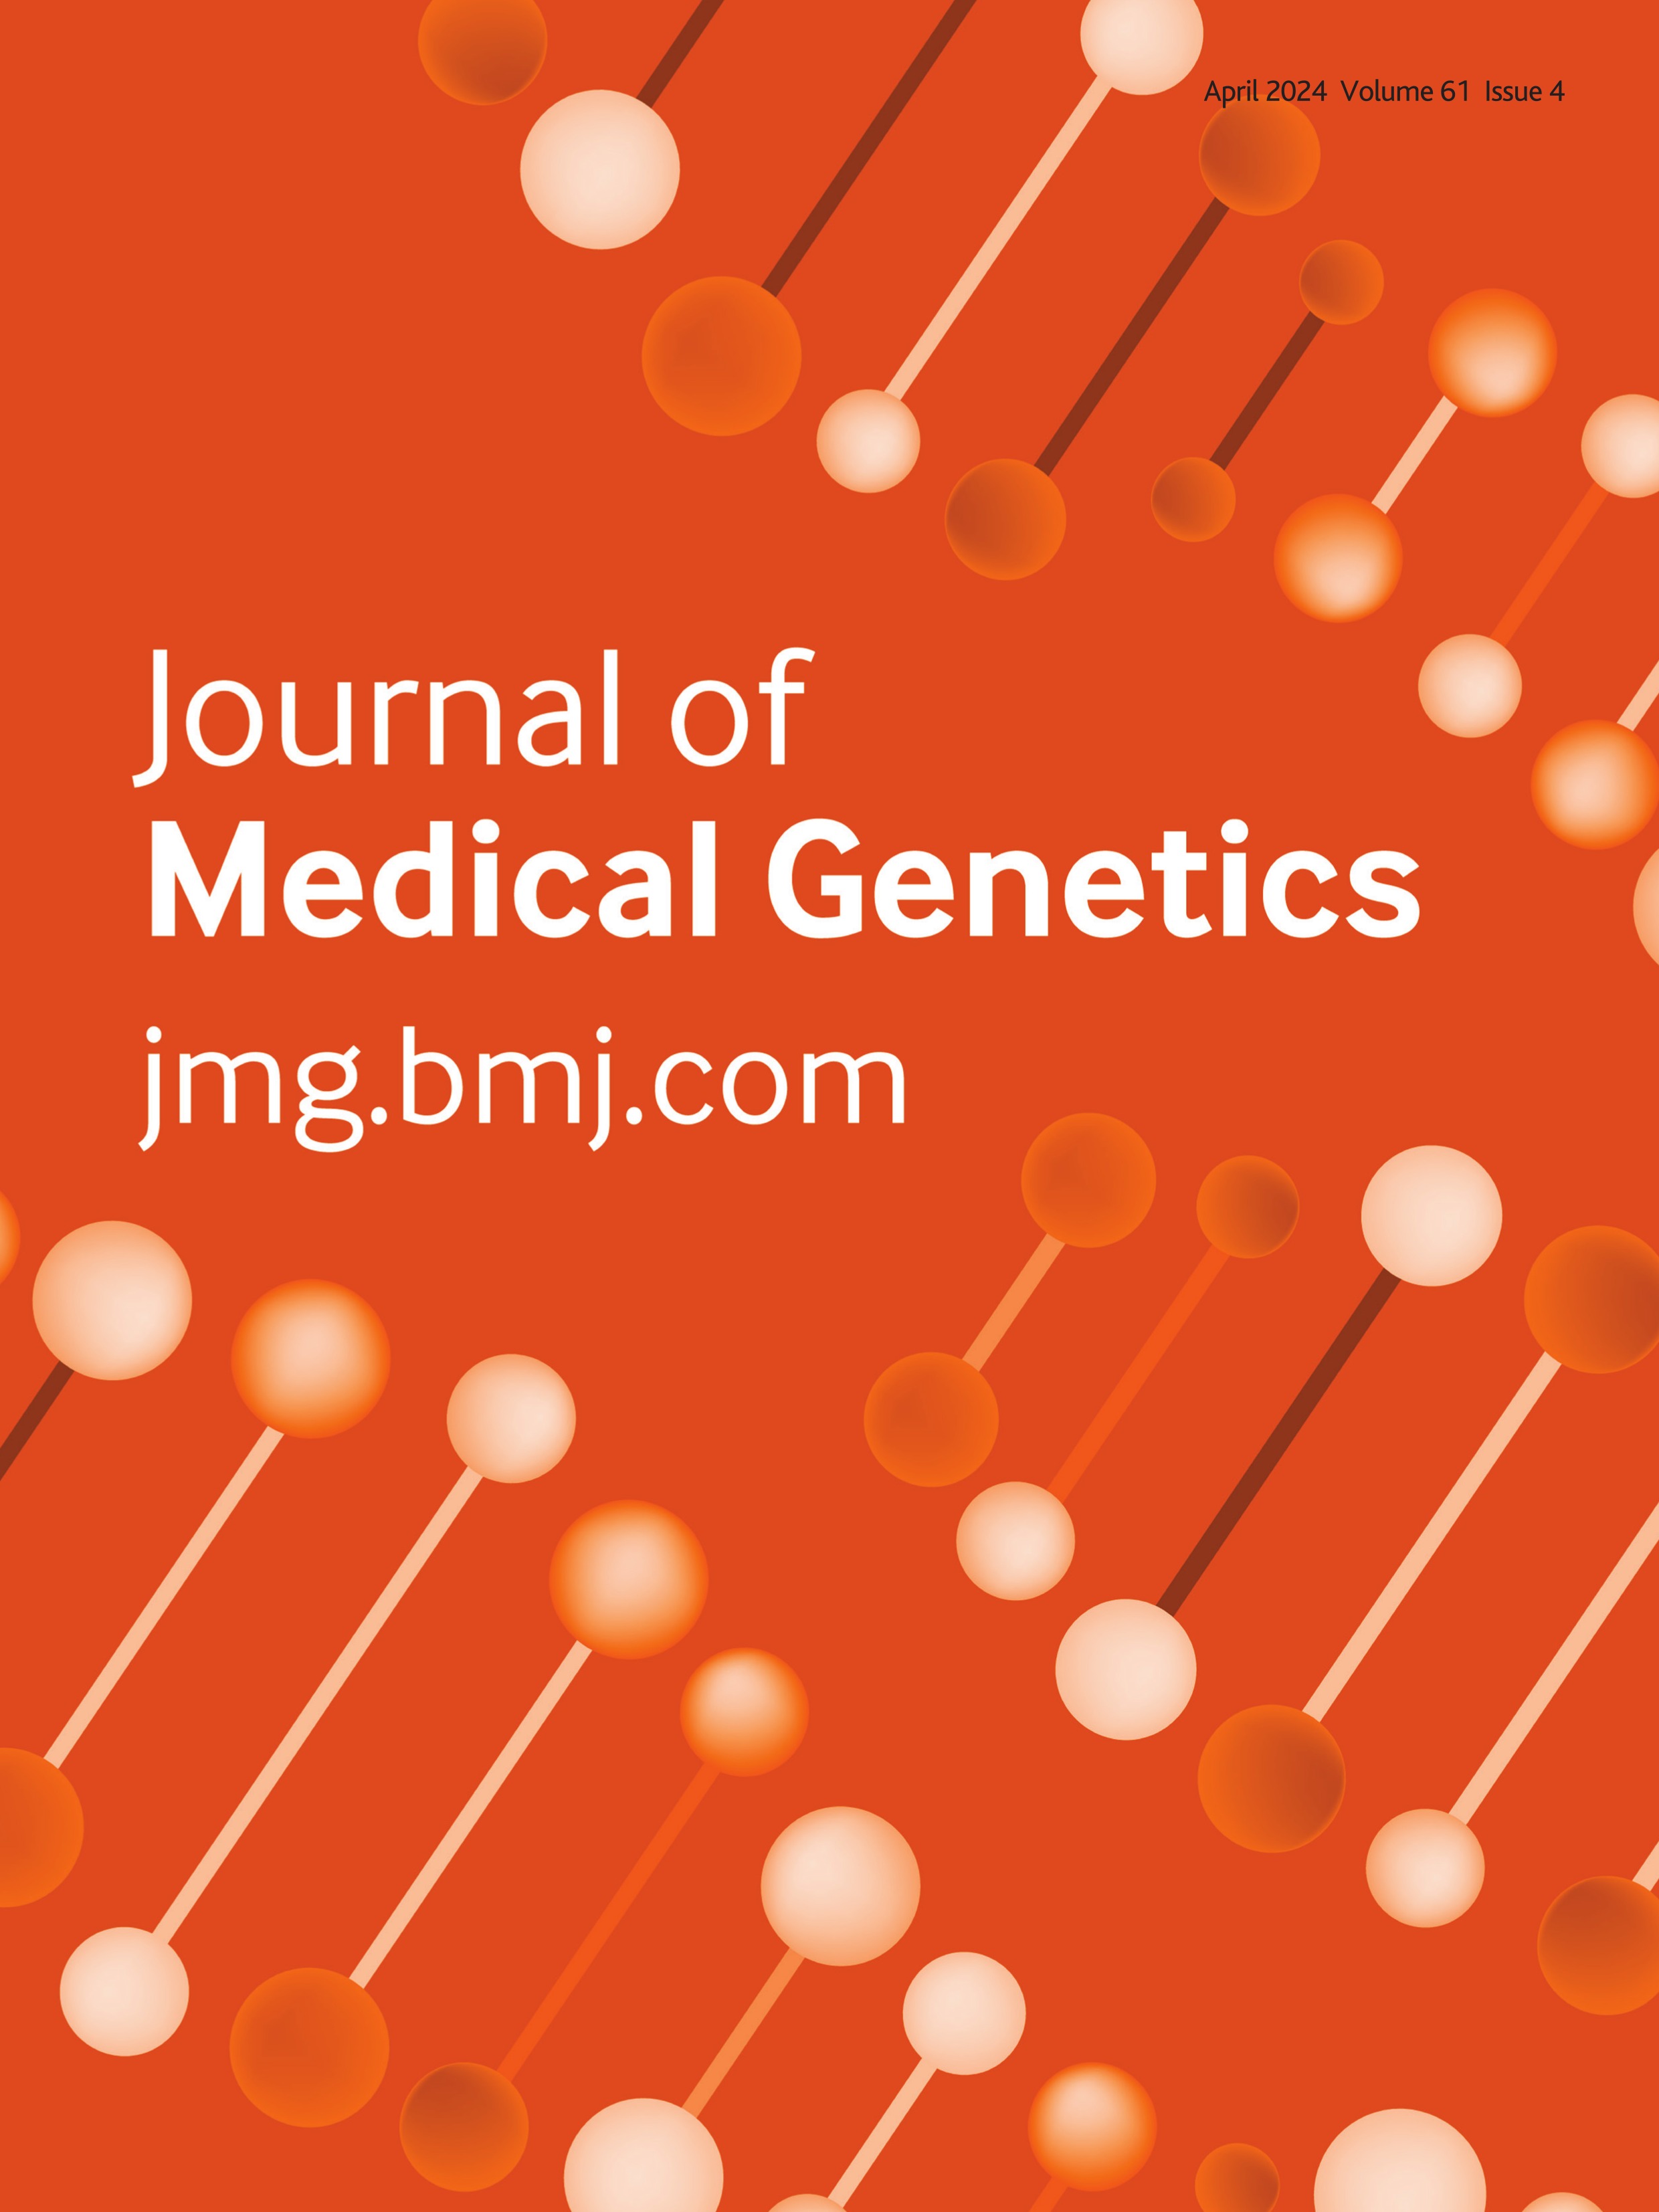 Titin copy number variations associated with dominant inherited phenotypes